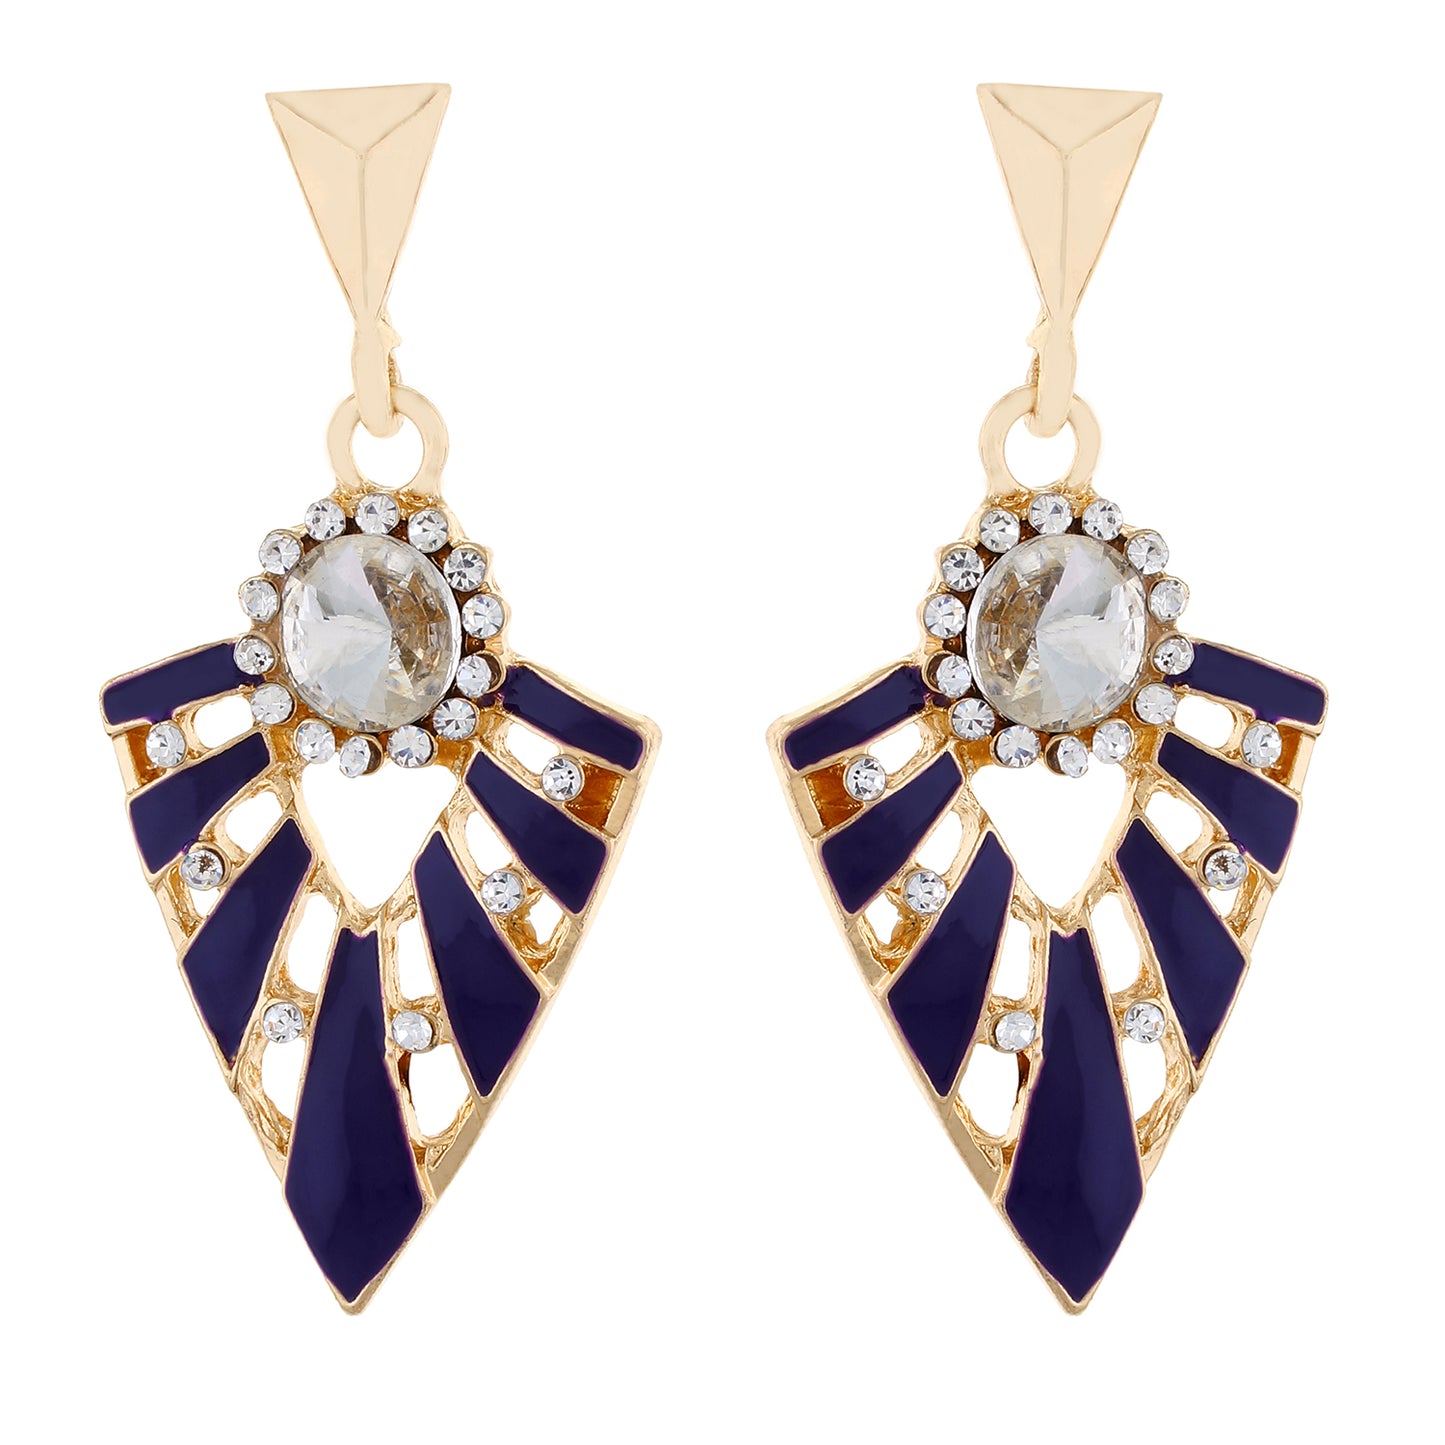 Purple colour Triangular Design Hanging Earrings for Girls and Women